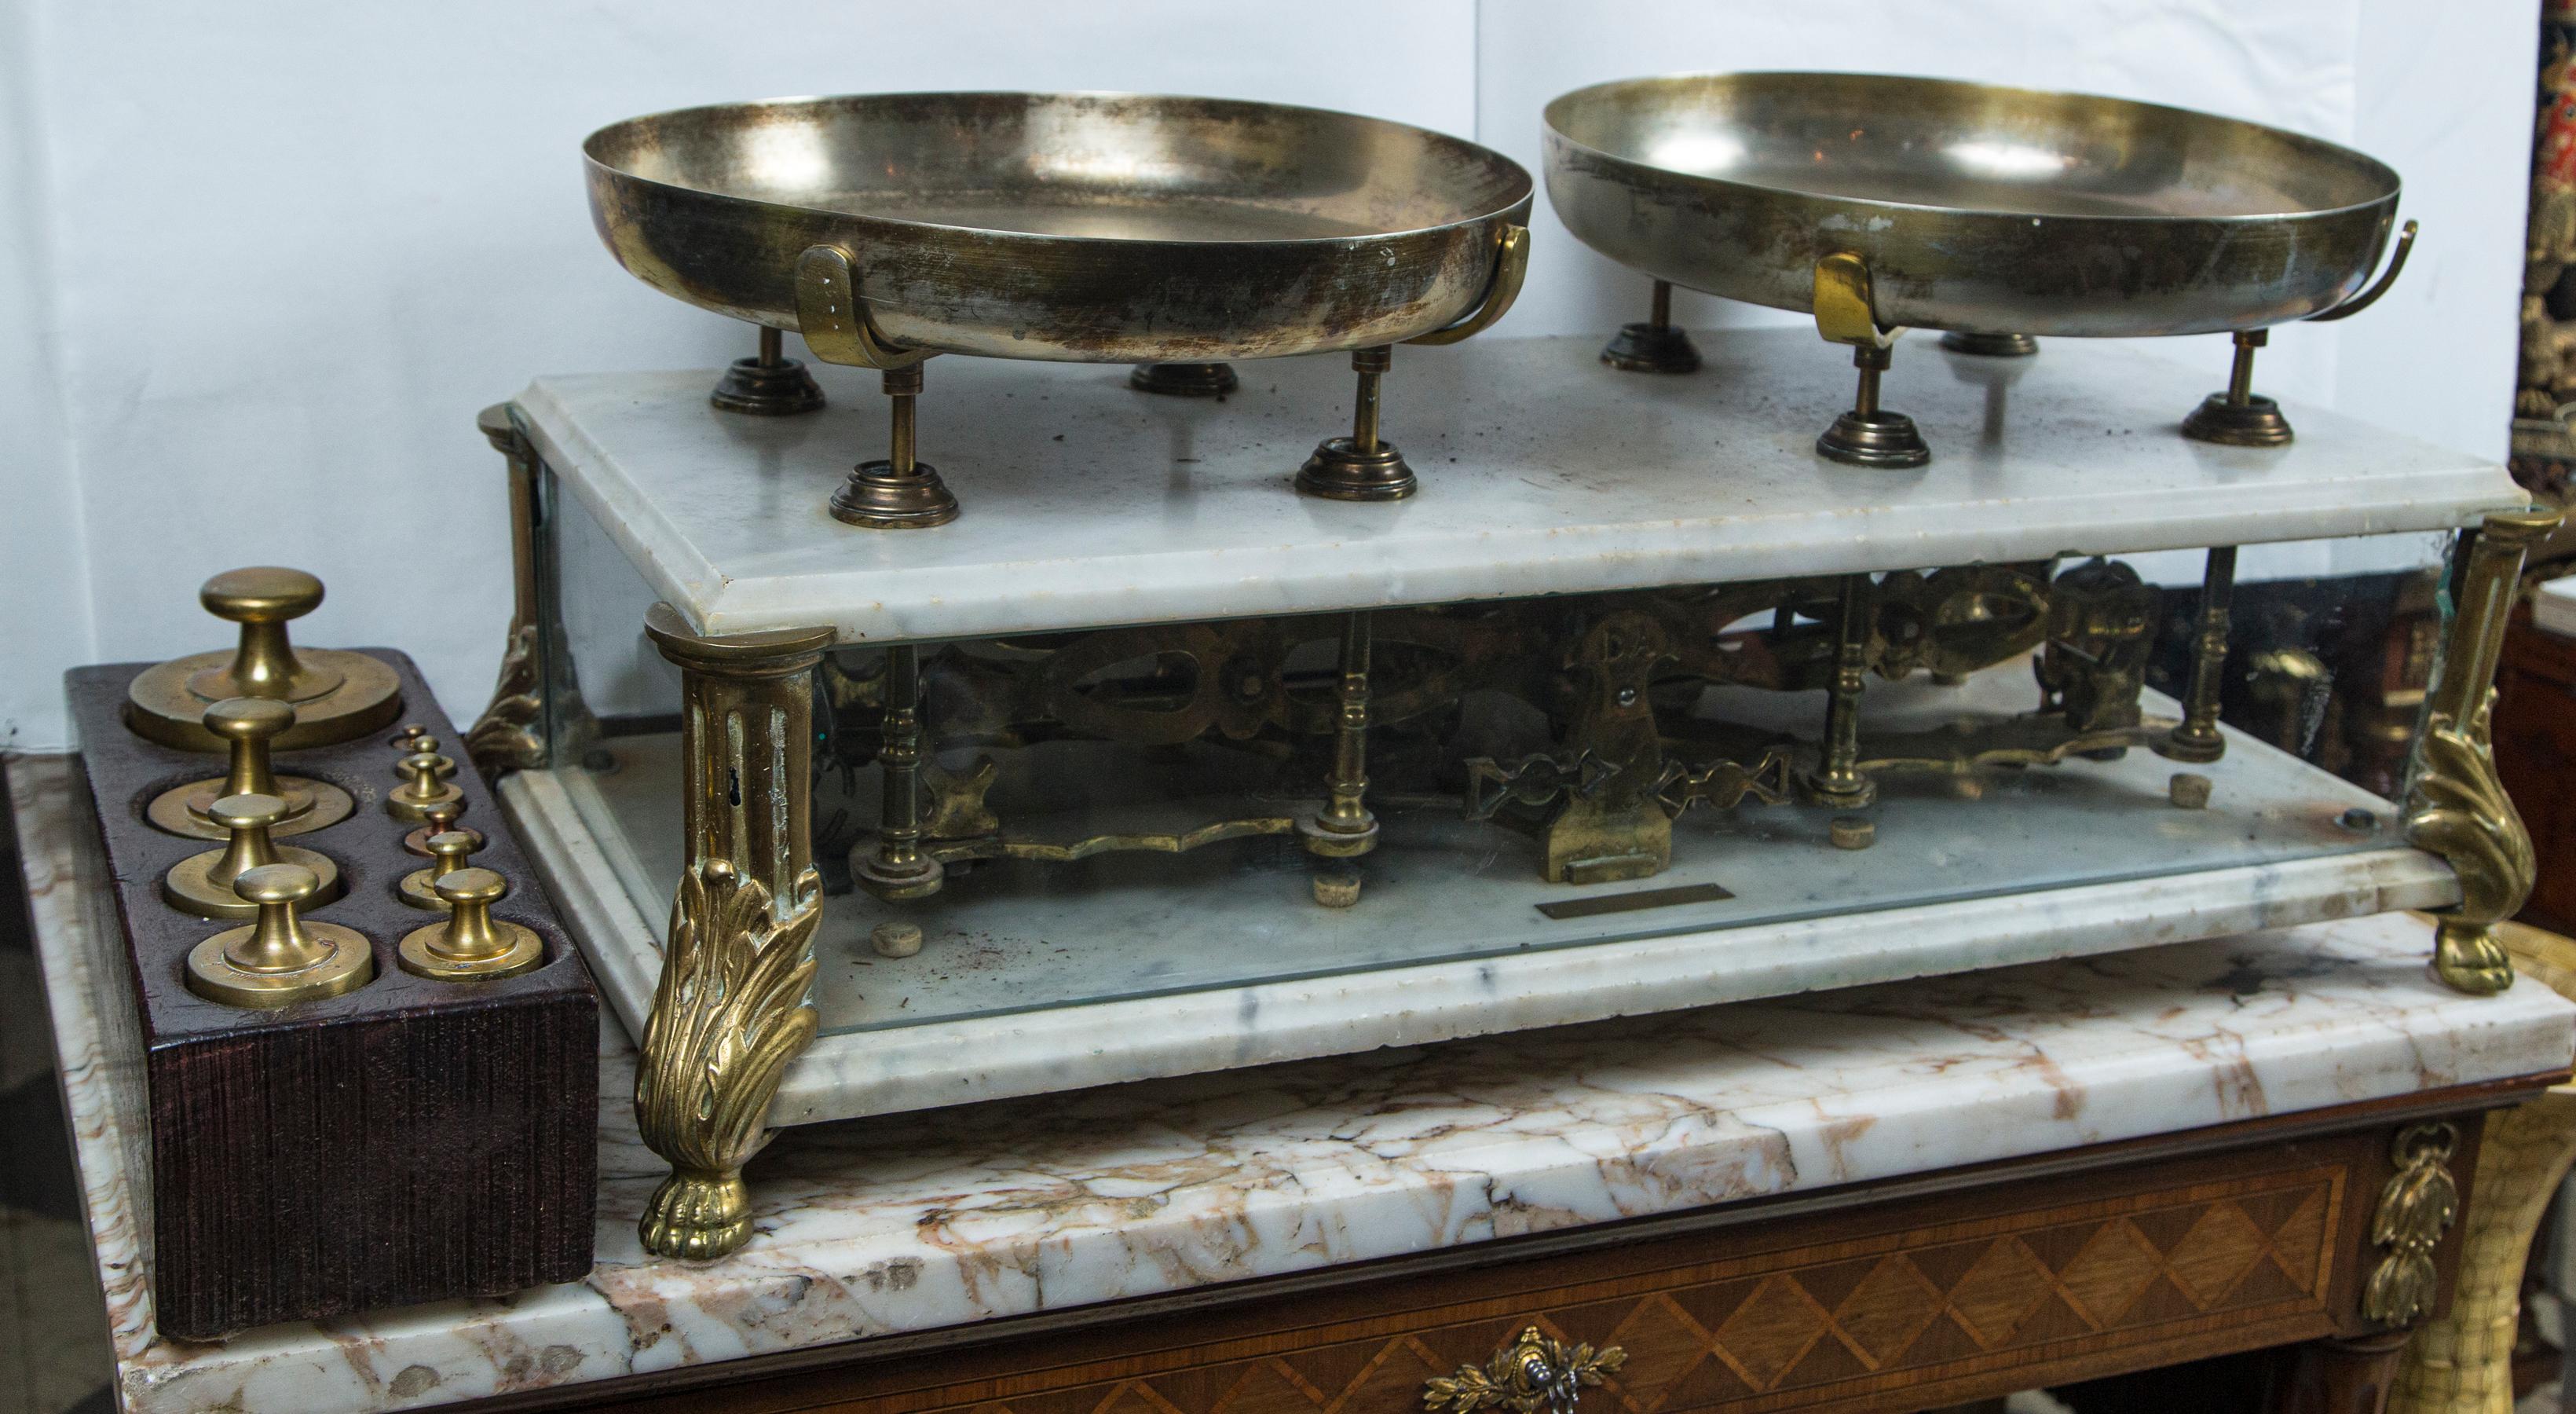 Marble top and base, bronze legs, glass sides, and brass weight pans. The workings visible thru the glass. The back and one glass on the side are missing, there is an engraved plaque on the front side, within the case that reads DOMINICO ARCIELLO,